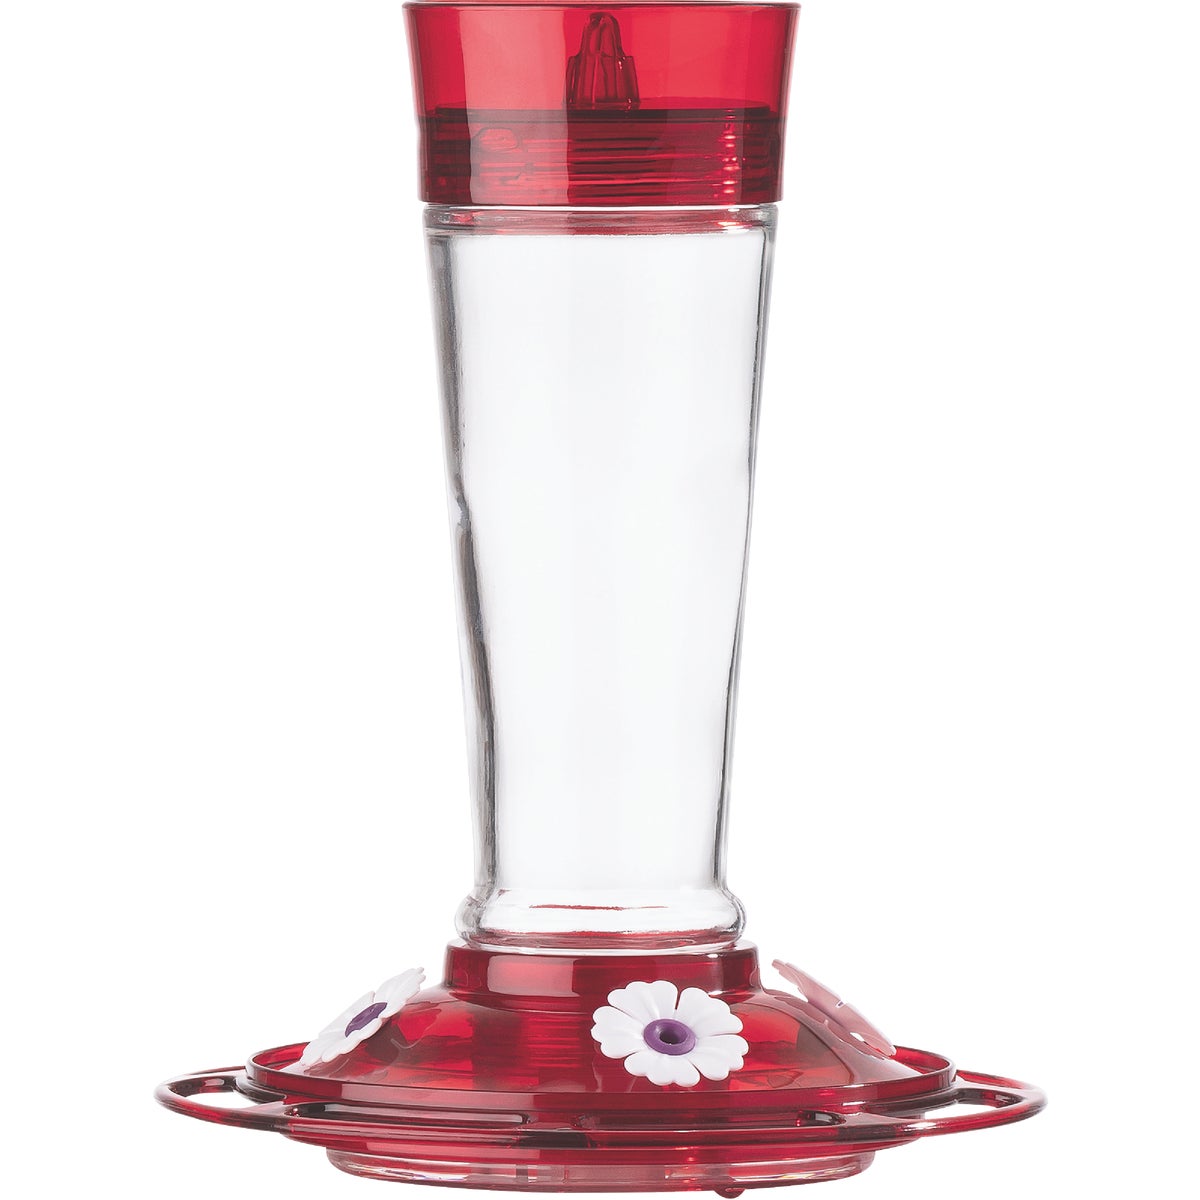 Item 700470, Beautiful glass bottle with red cap and basin, and 5 integrated perches.